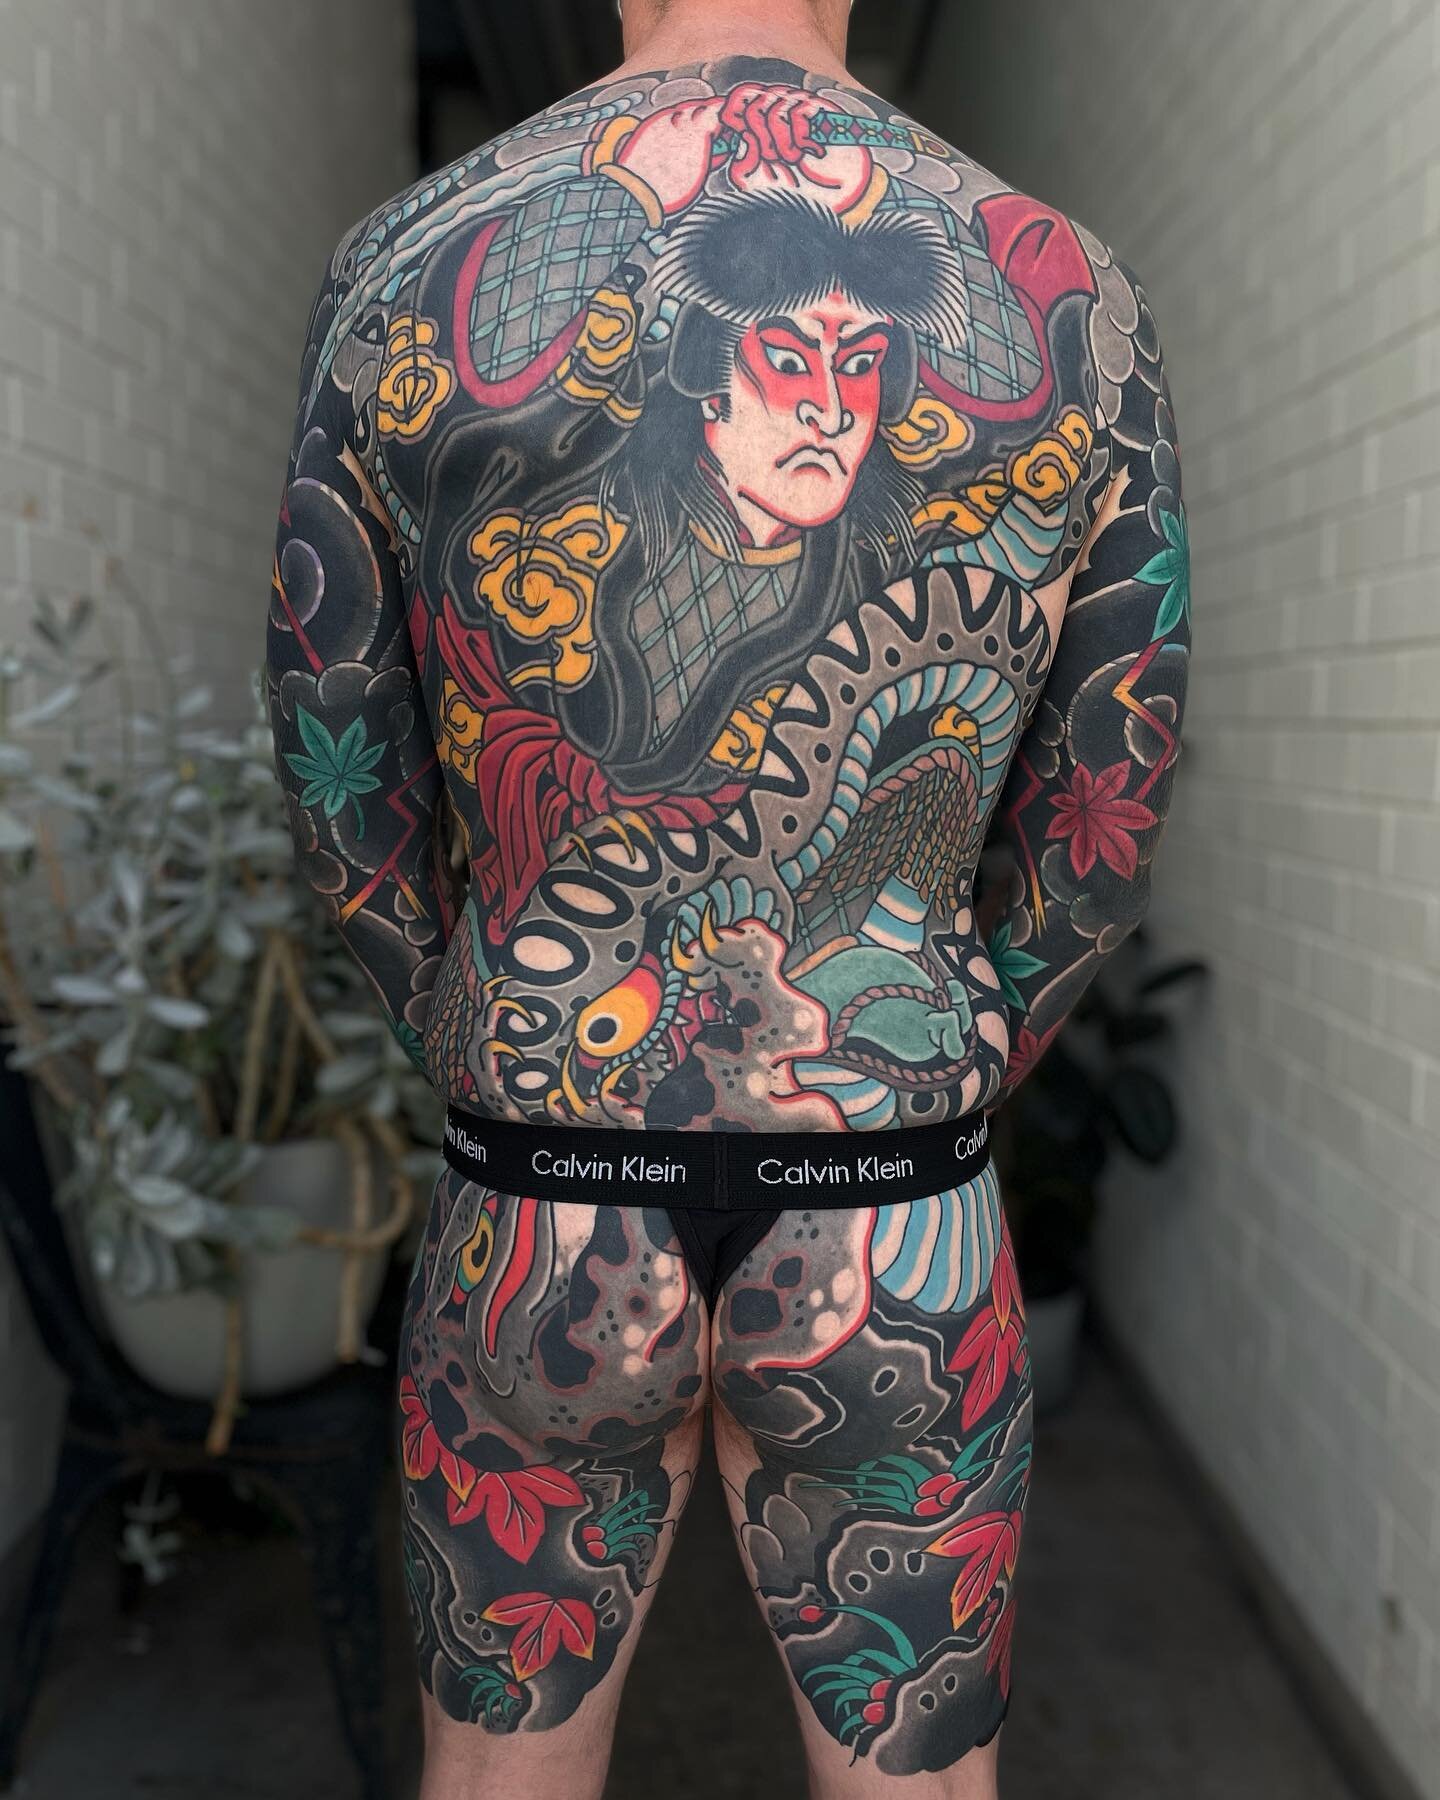 Here&rsquo;s an update on @kirkas_liam suit. I&rsquo;ve definately tattooed Liam the most out of anyone. Backpiece has been settled for a while now and we have both his old half sleeves covered. We&rsquo;ve moved onto his front for the final chapter,